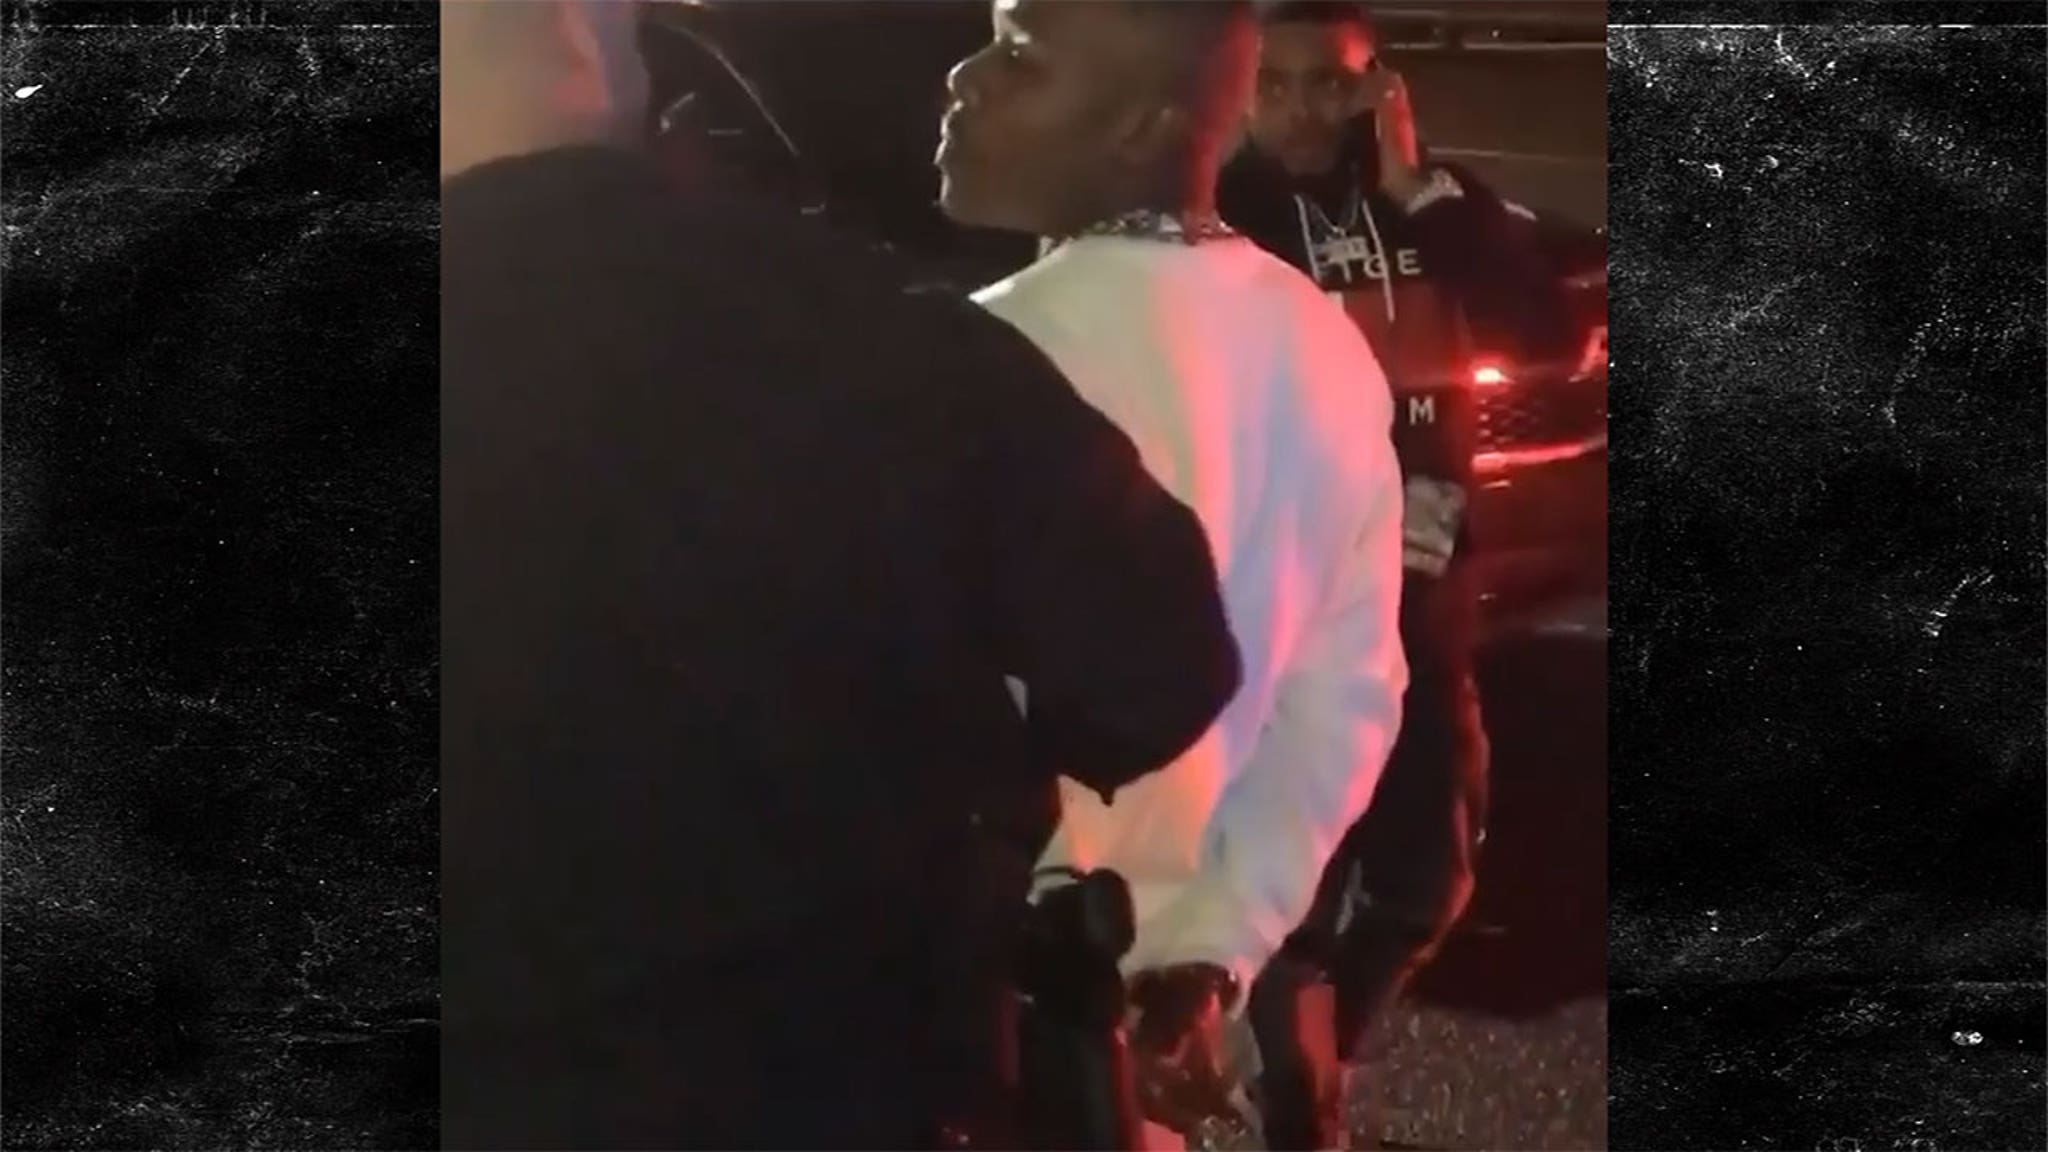 DaBaby Busted and Charged With Marijuana Possession, Resisting Arrest